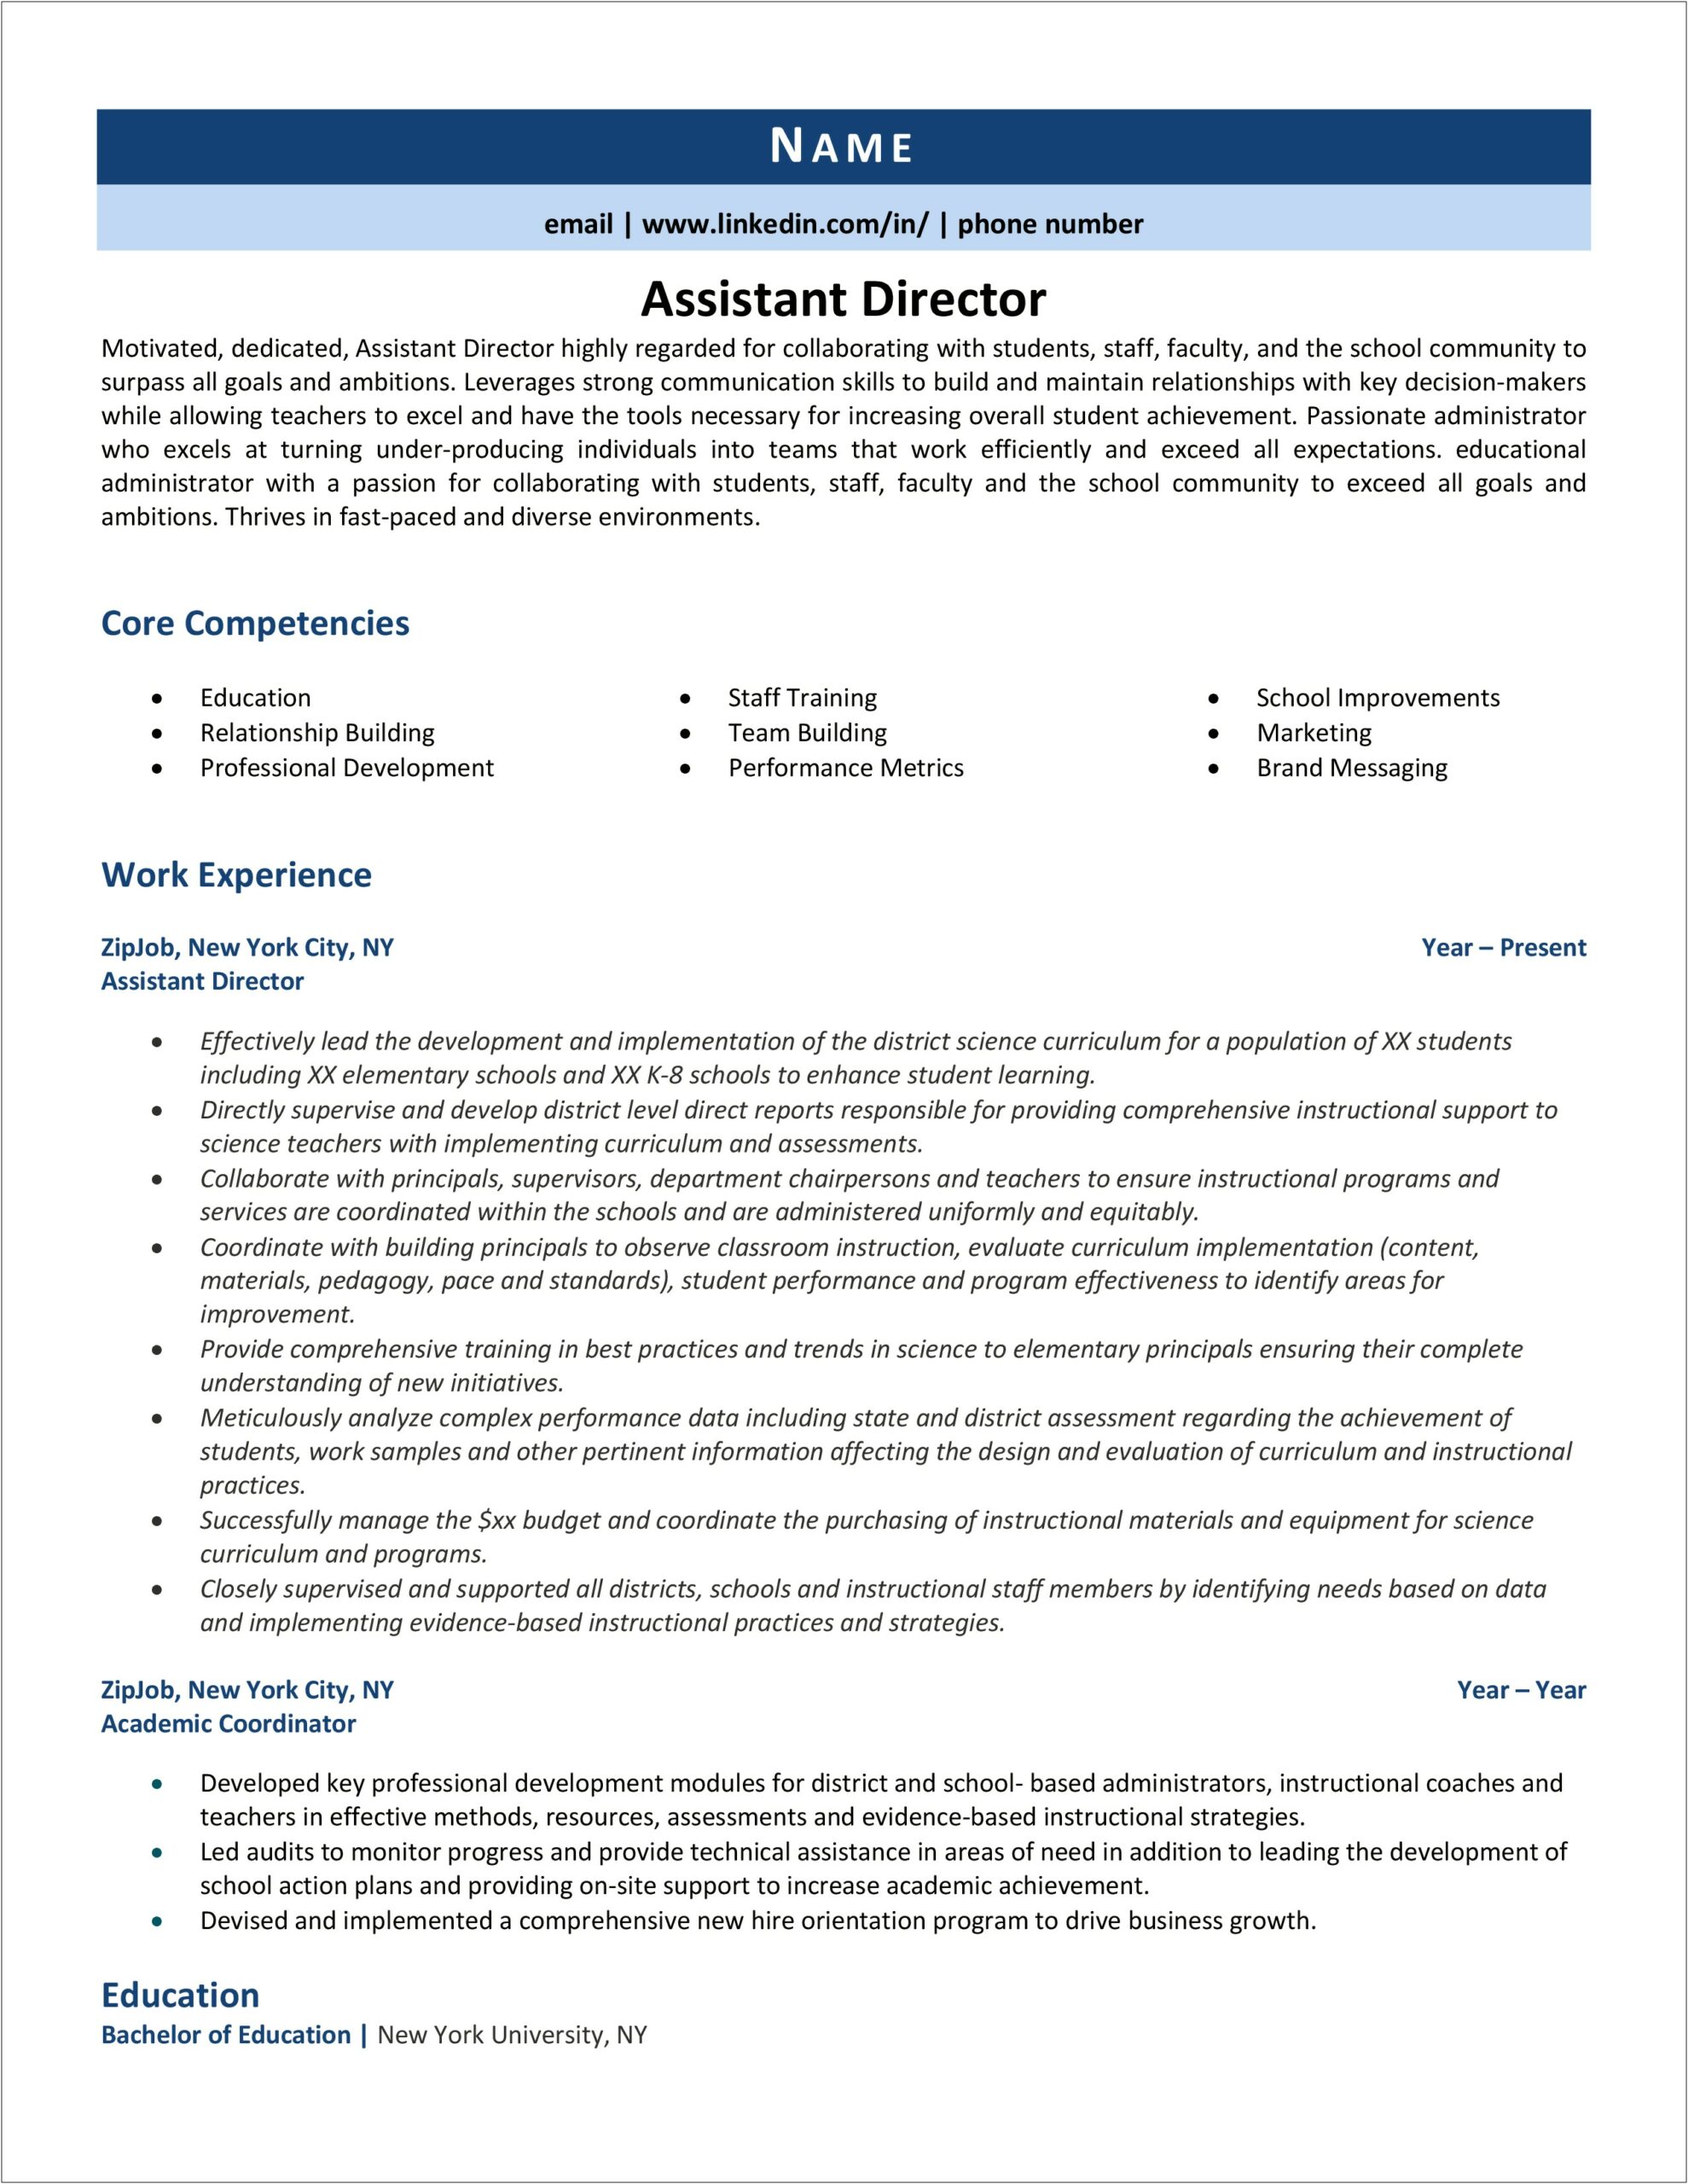 Example Resume For An Instructional Monito